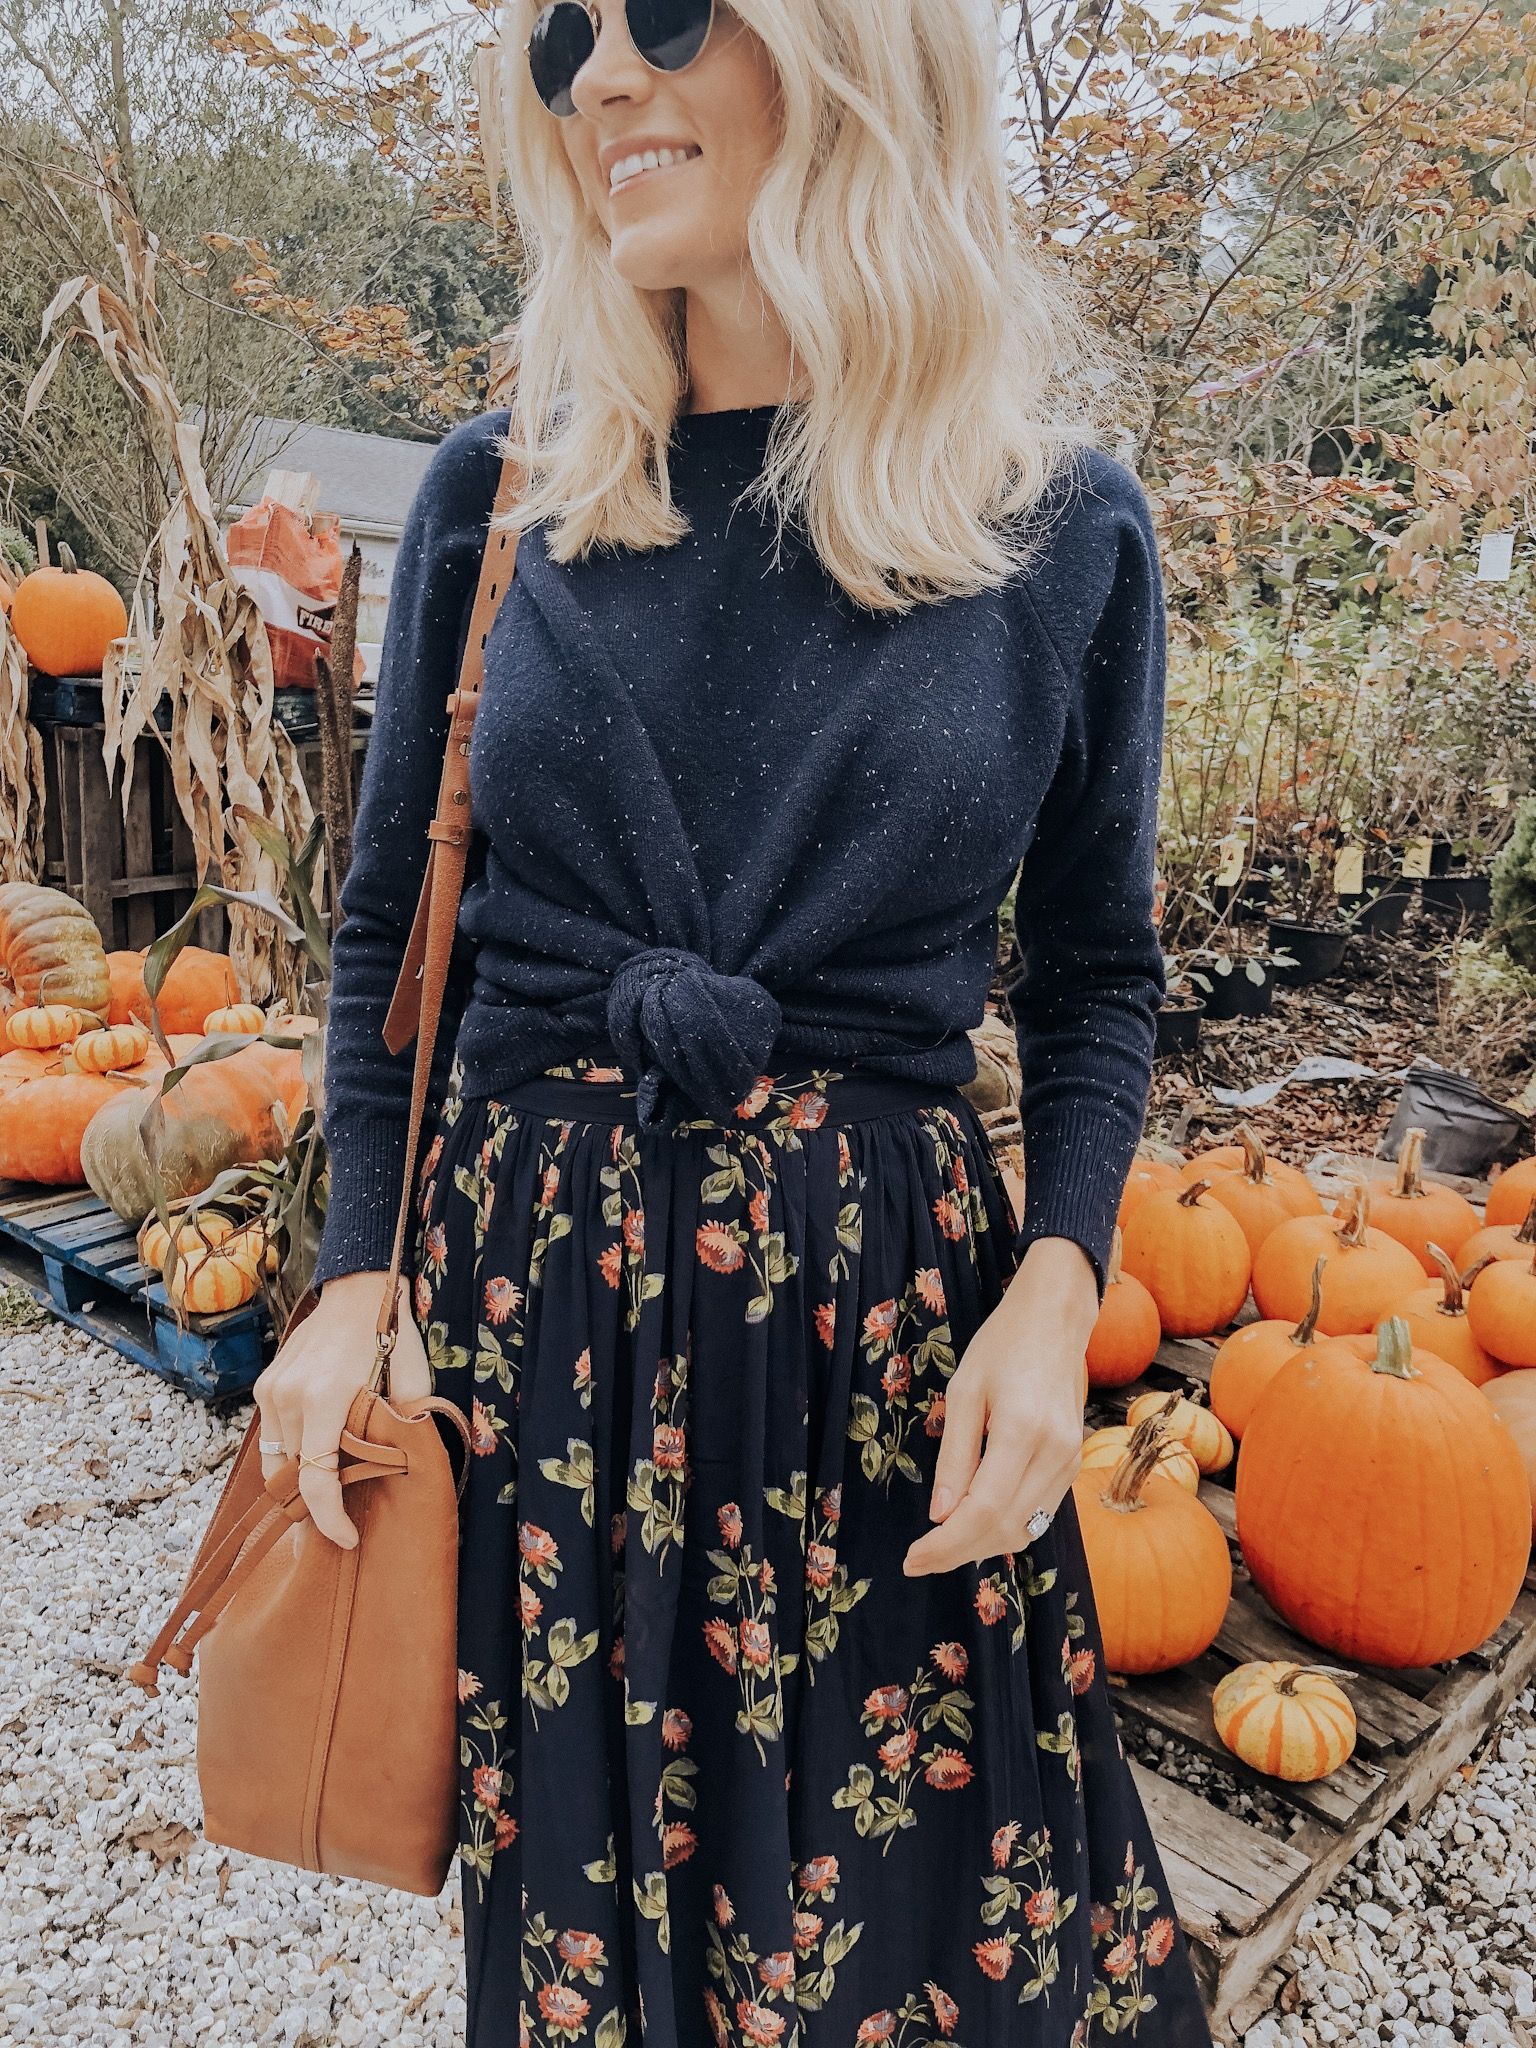 FALL CAPSULE WARDROBE | GUIDE TO YOUR MOST STYLISH FALL - Pure Joy Home - FALL CAPSULE WARDROBE | GUIDE TO YOUR MOST STYLISH FALL - Pure Joy Home -   18 boho style Fall ideas